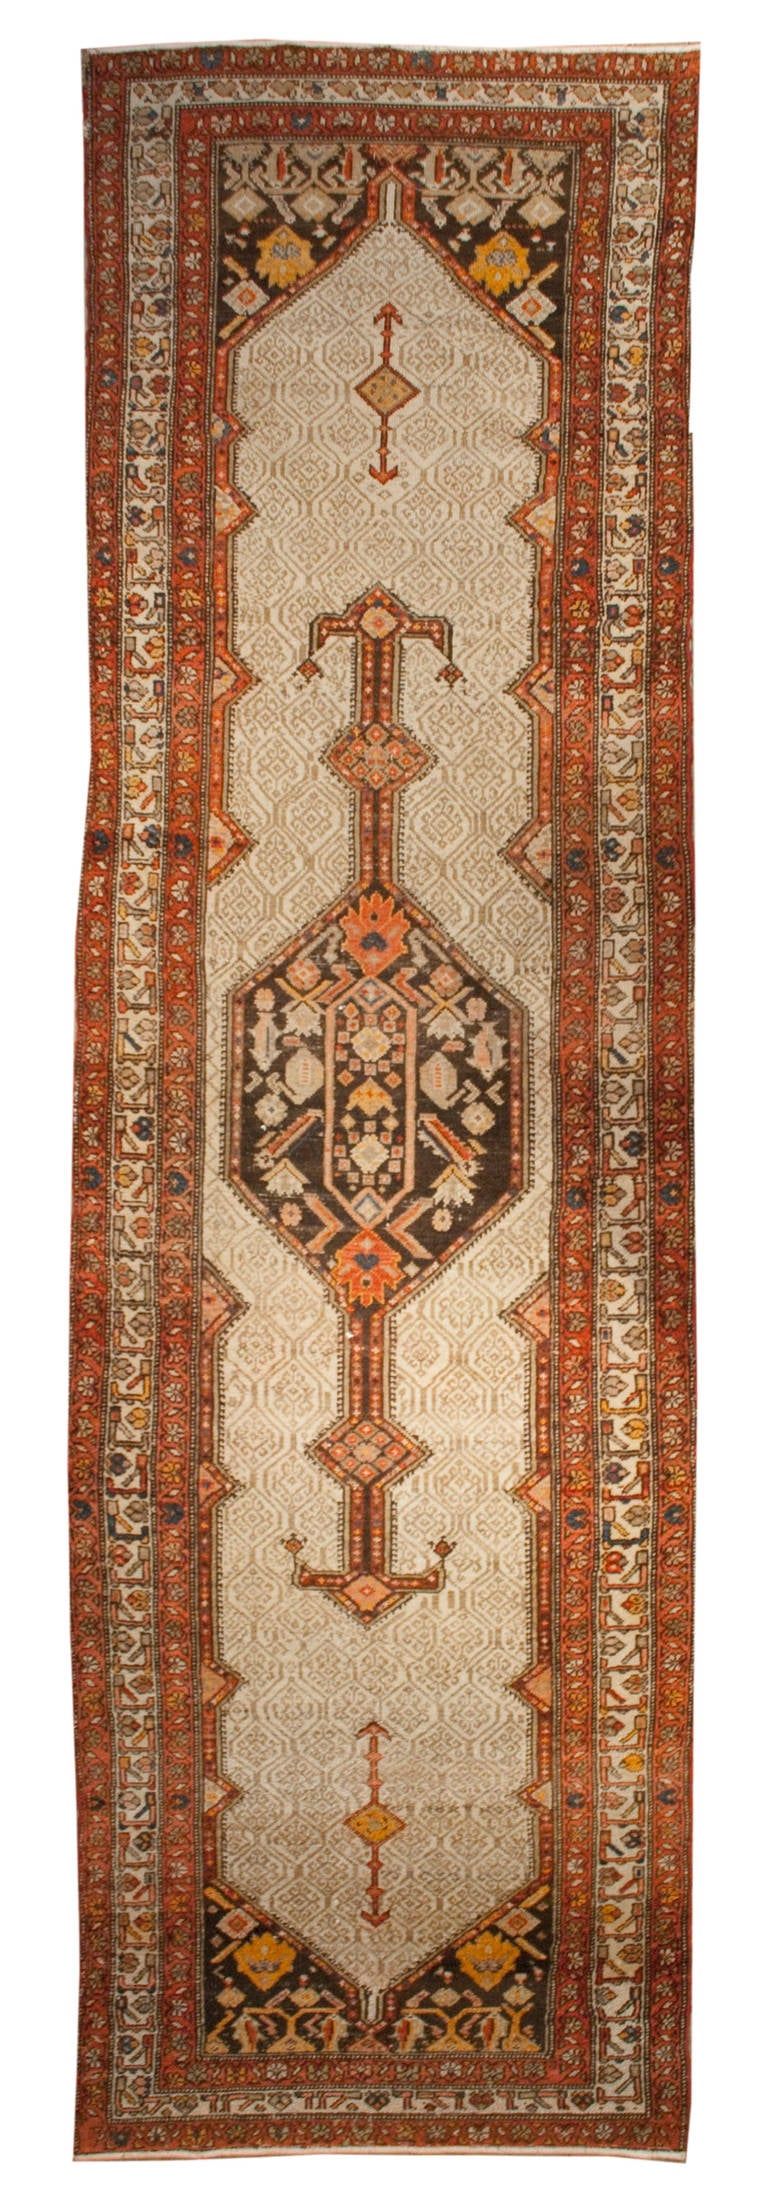 A late 19th century Persian Serab runner with large central geometric medallion on an intricately woven tone on tone background, surrounded by multiple contrasting floral borders.